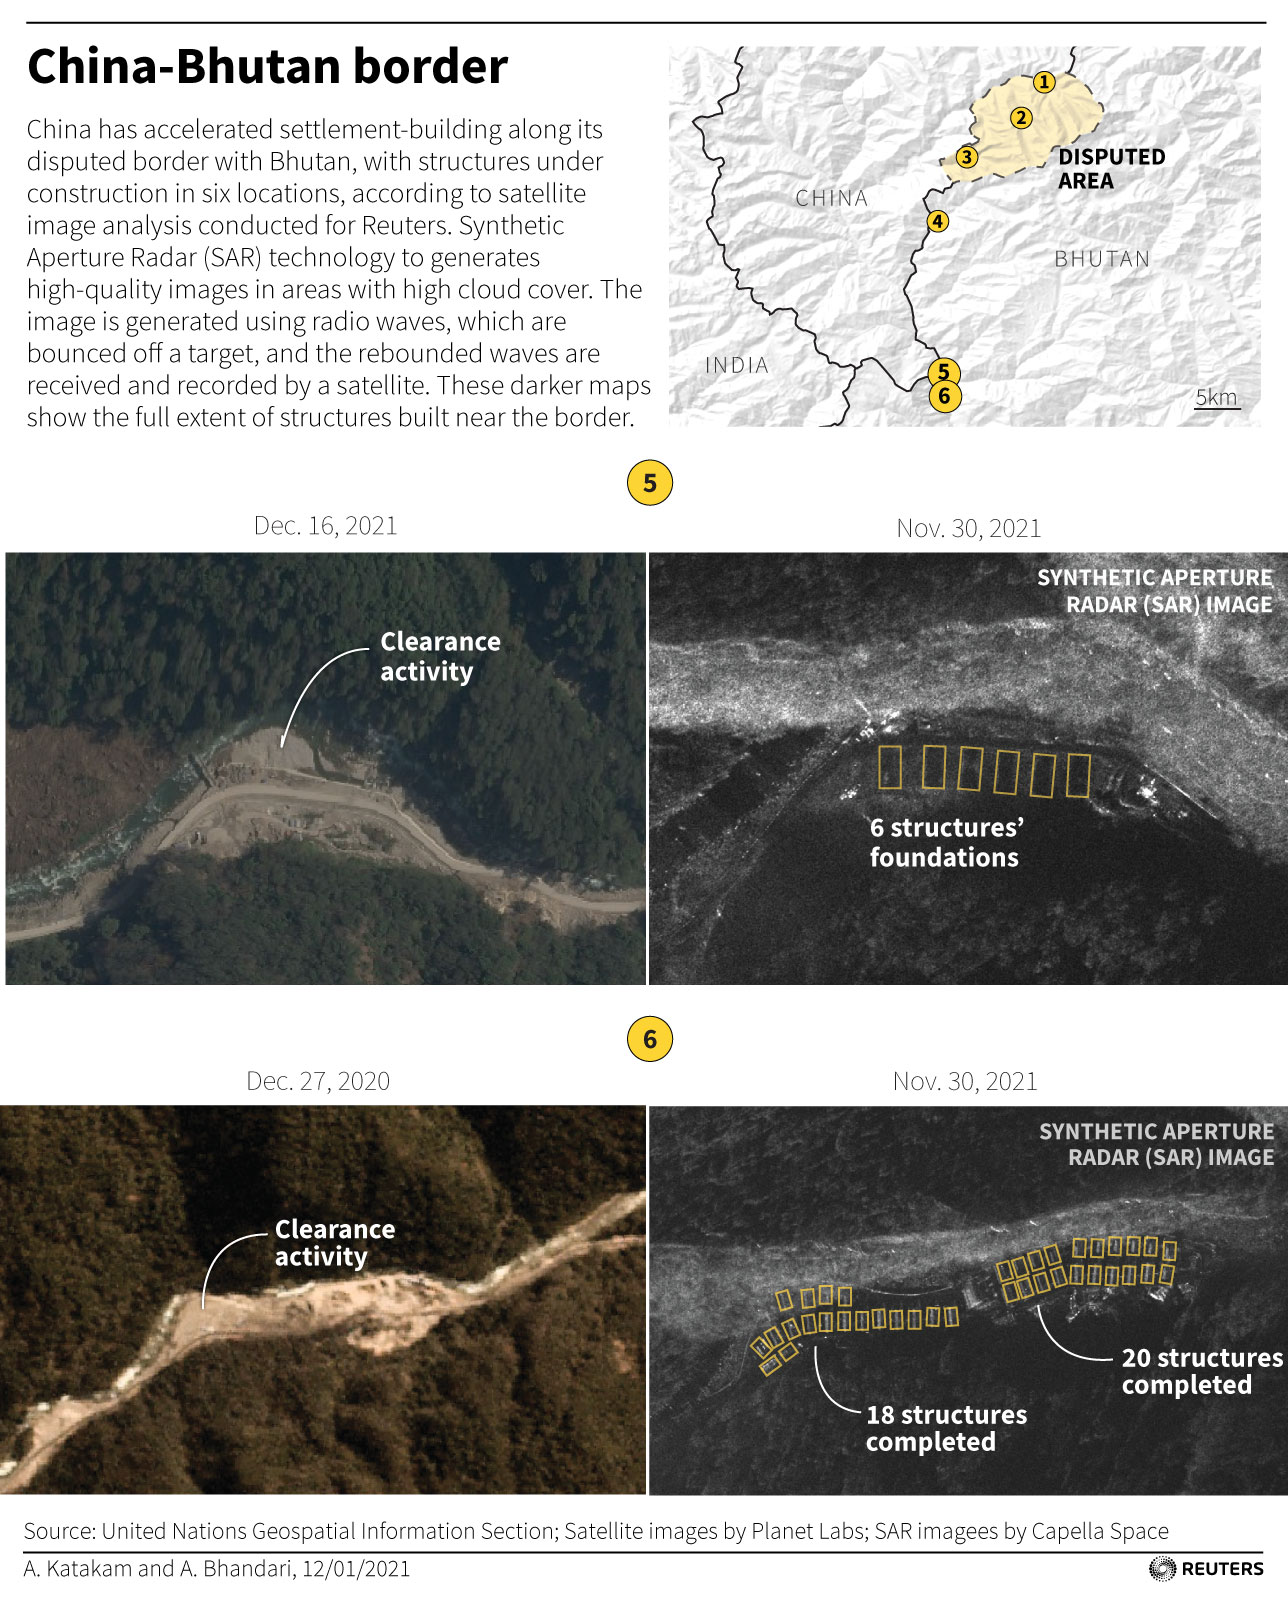 China has accelerated settlement-building along its disputed border with Bhutan, with structures under construction in six locations, according to satellite image analysis conducted for Reuters.